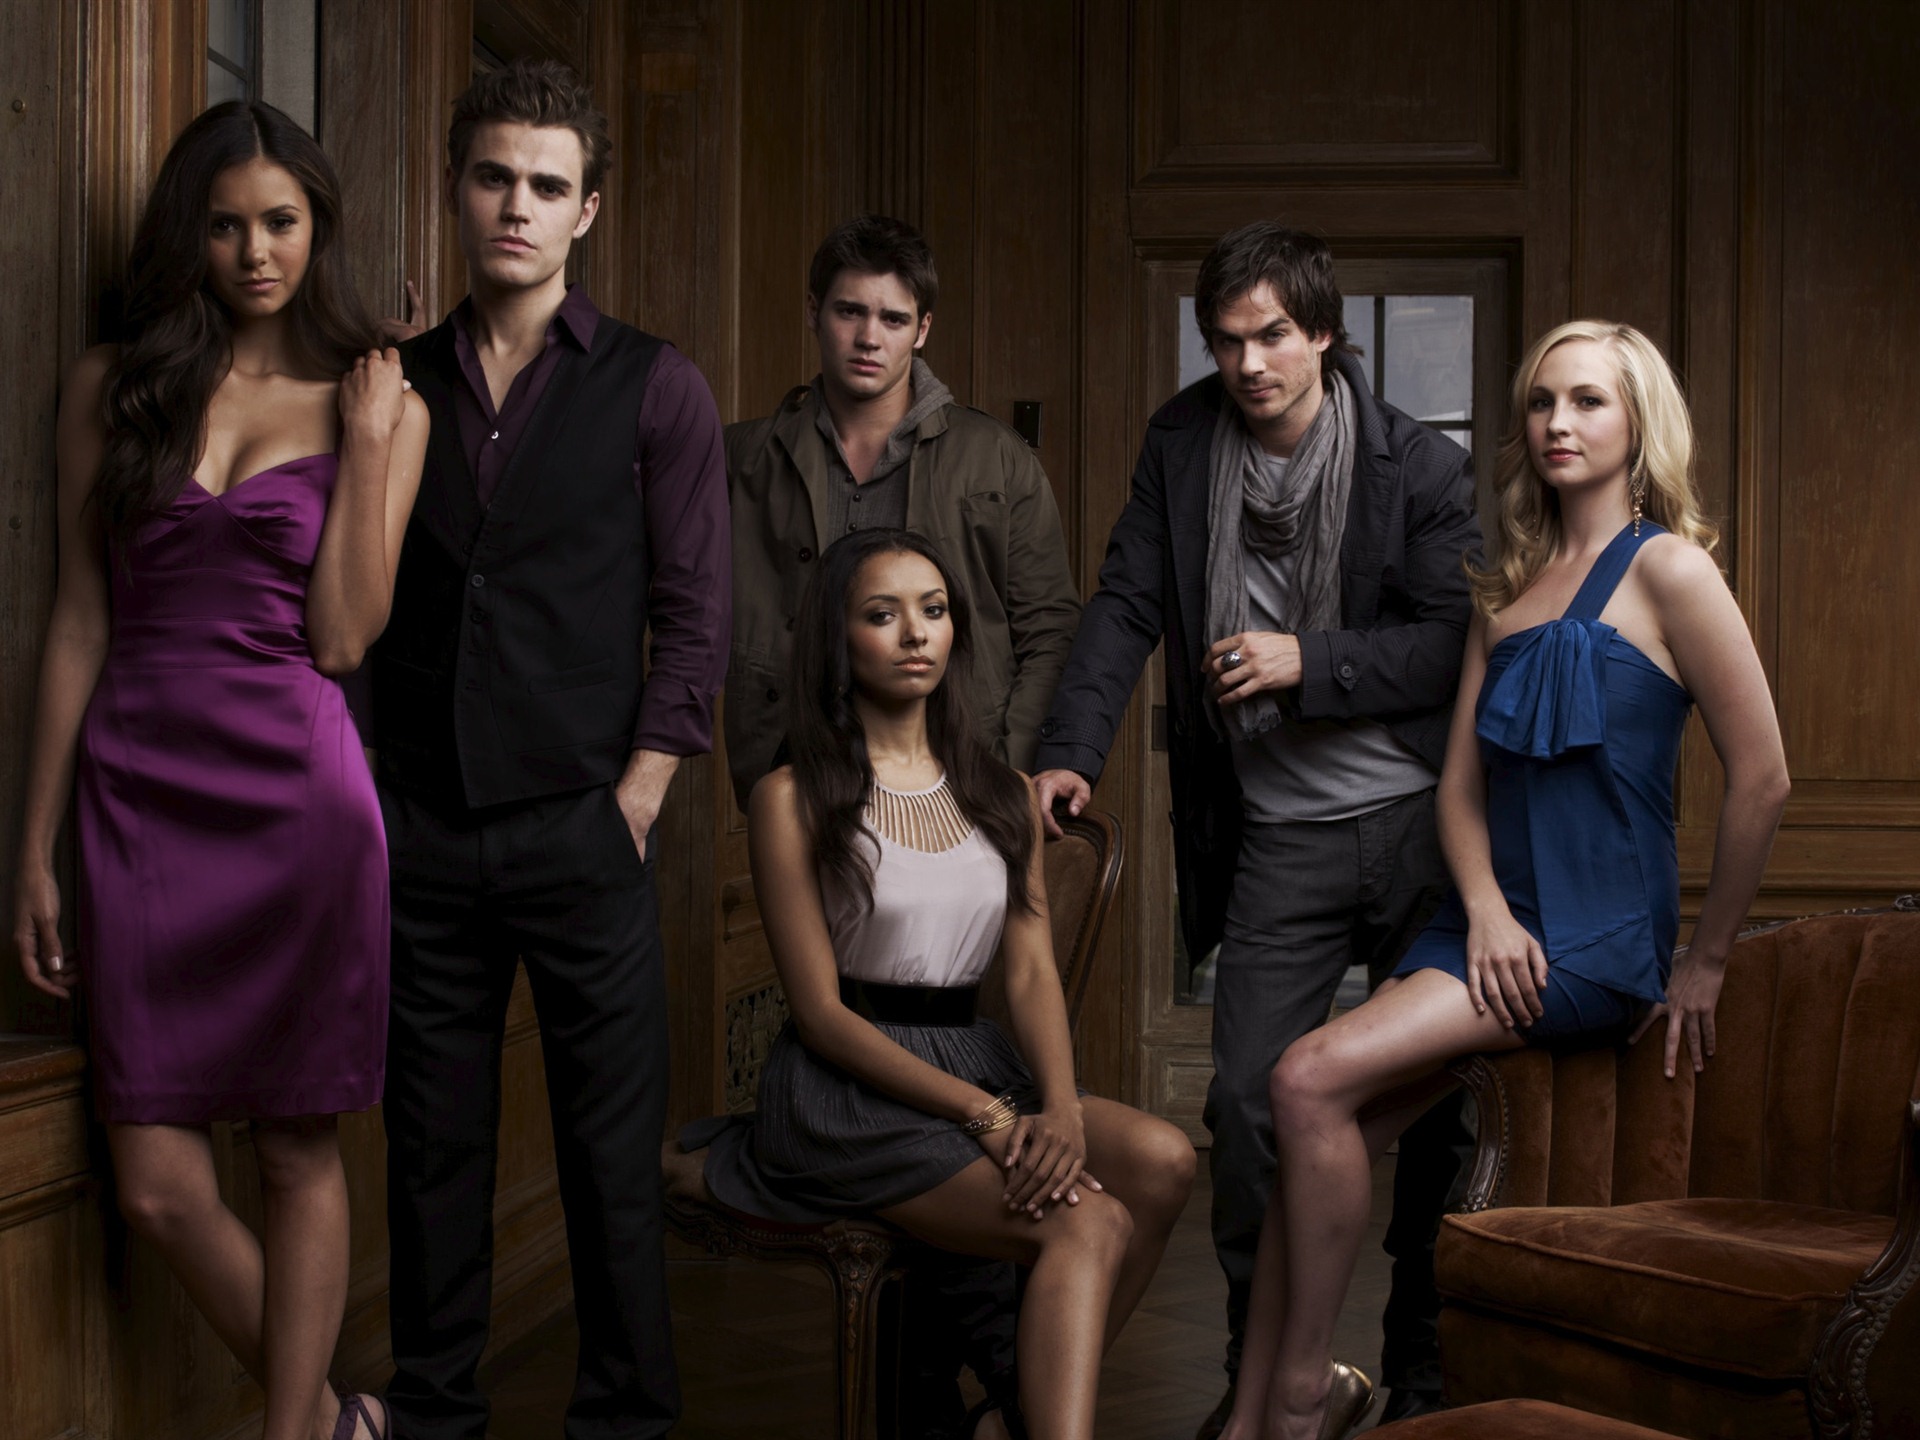 The Vampire Diaries HD Wallpapers #19 - 1920x1440